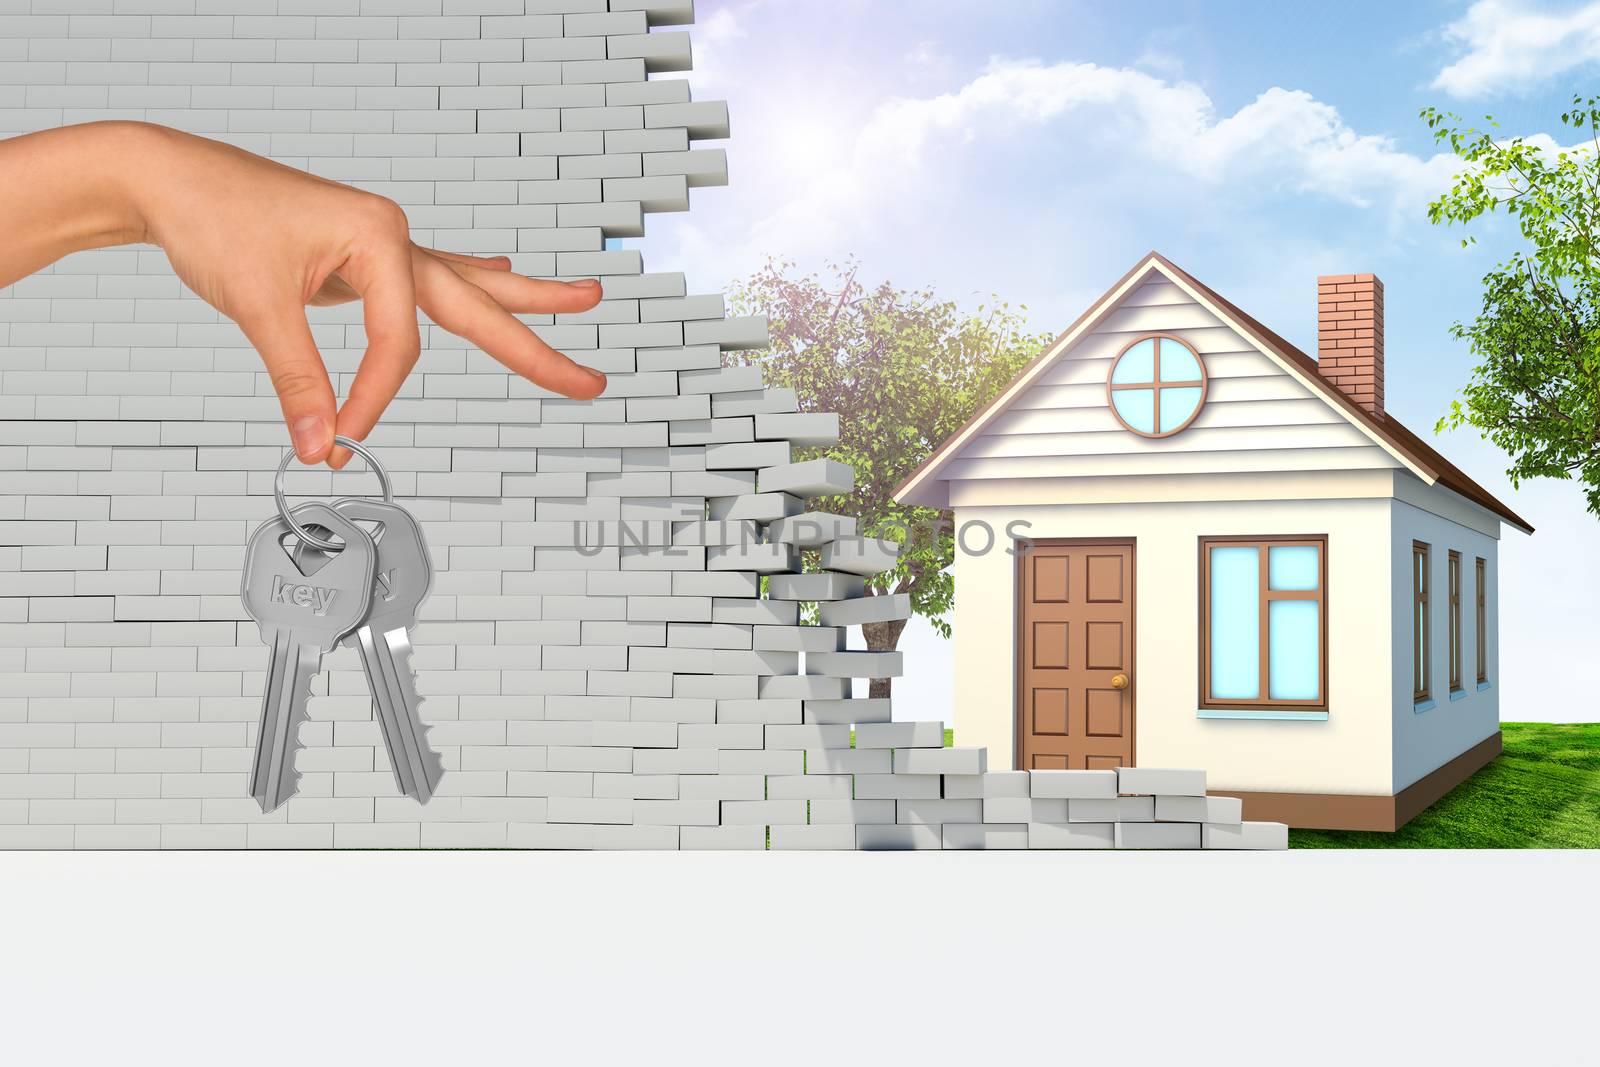 House in broken wall with hand holding keys and green grass and trees